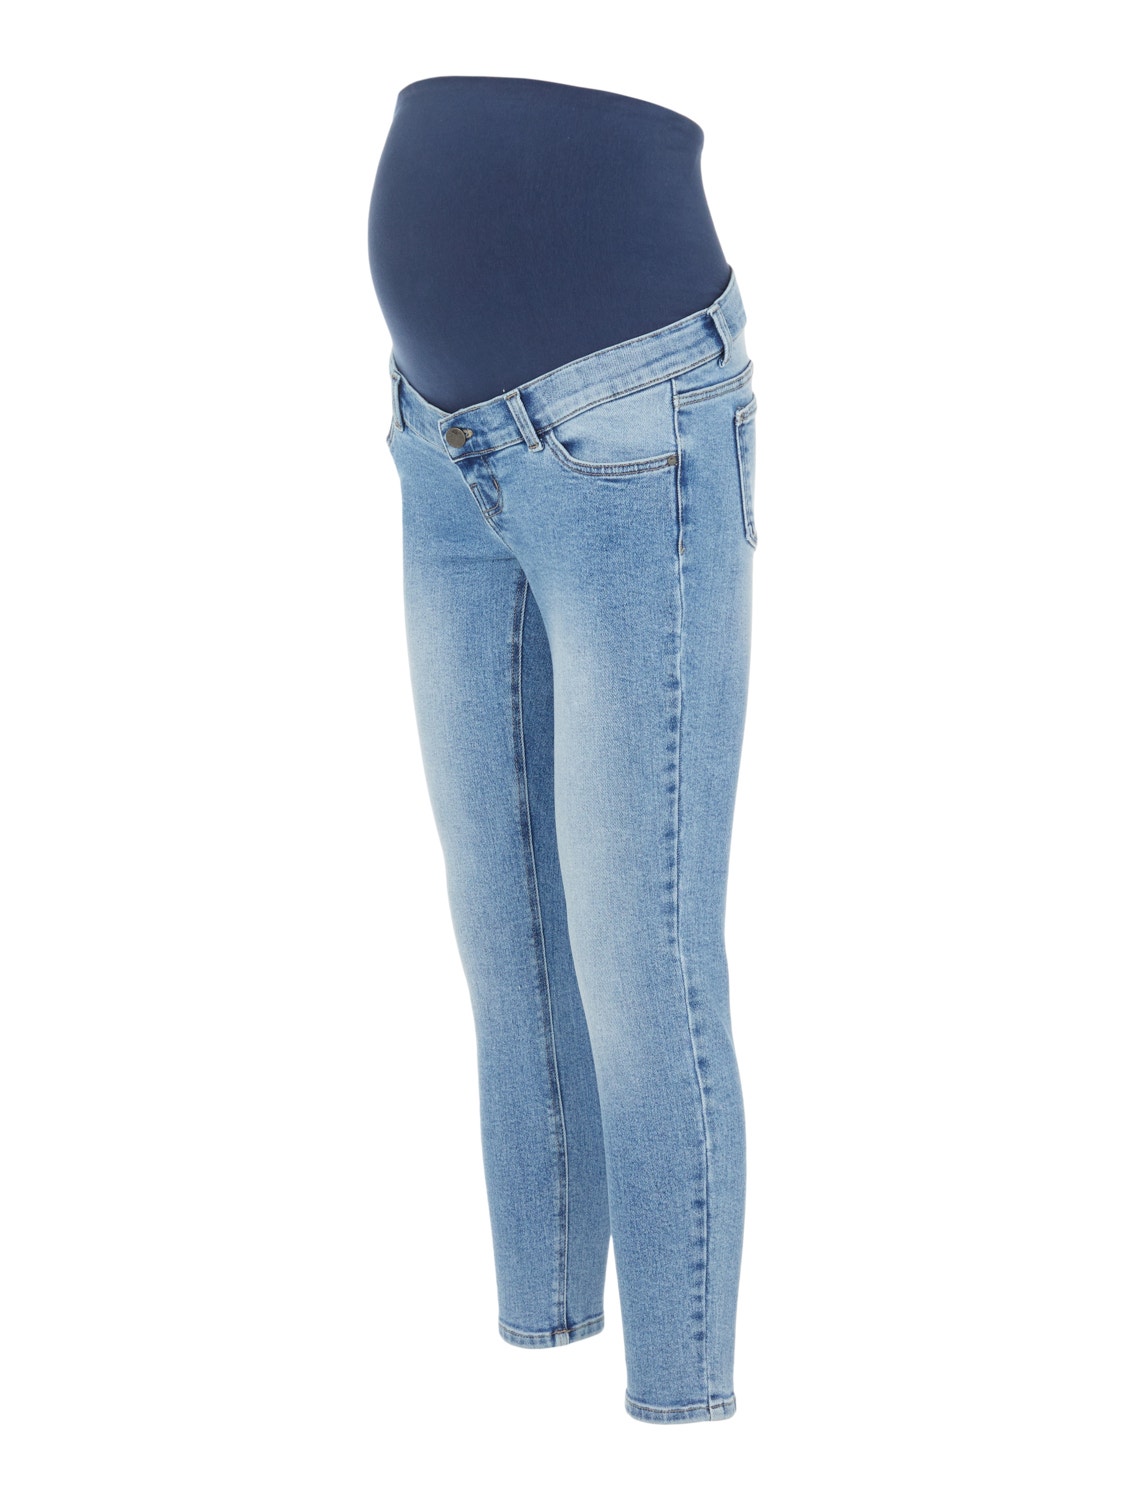 MAMA.LICIOUS Jeans Slim Fit Taille moyenne -Light Blue Denim - 20015455